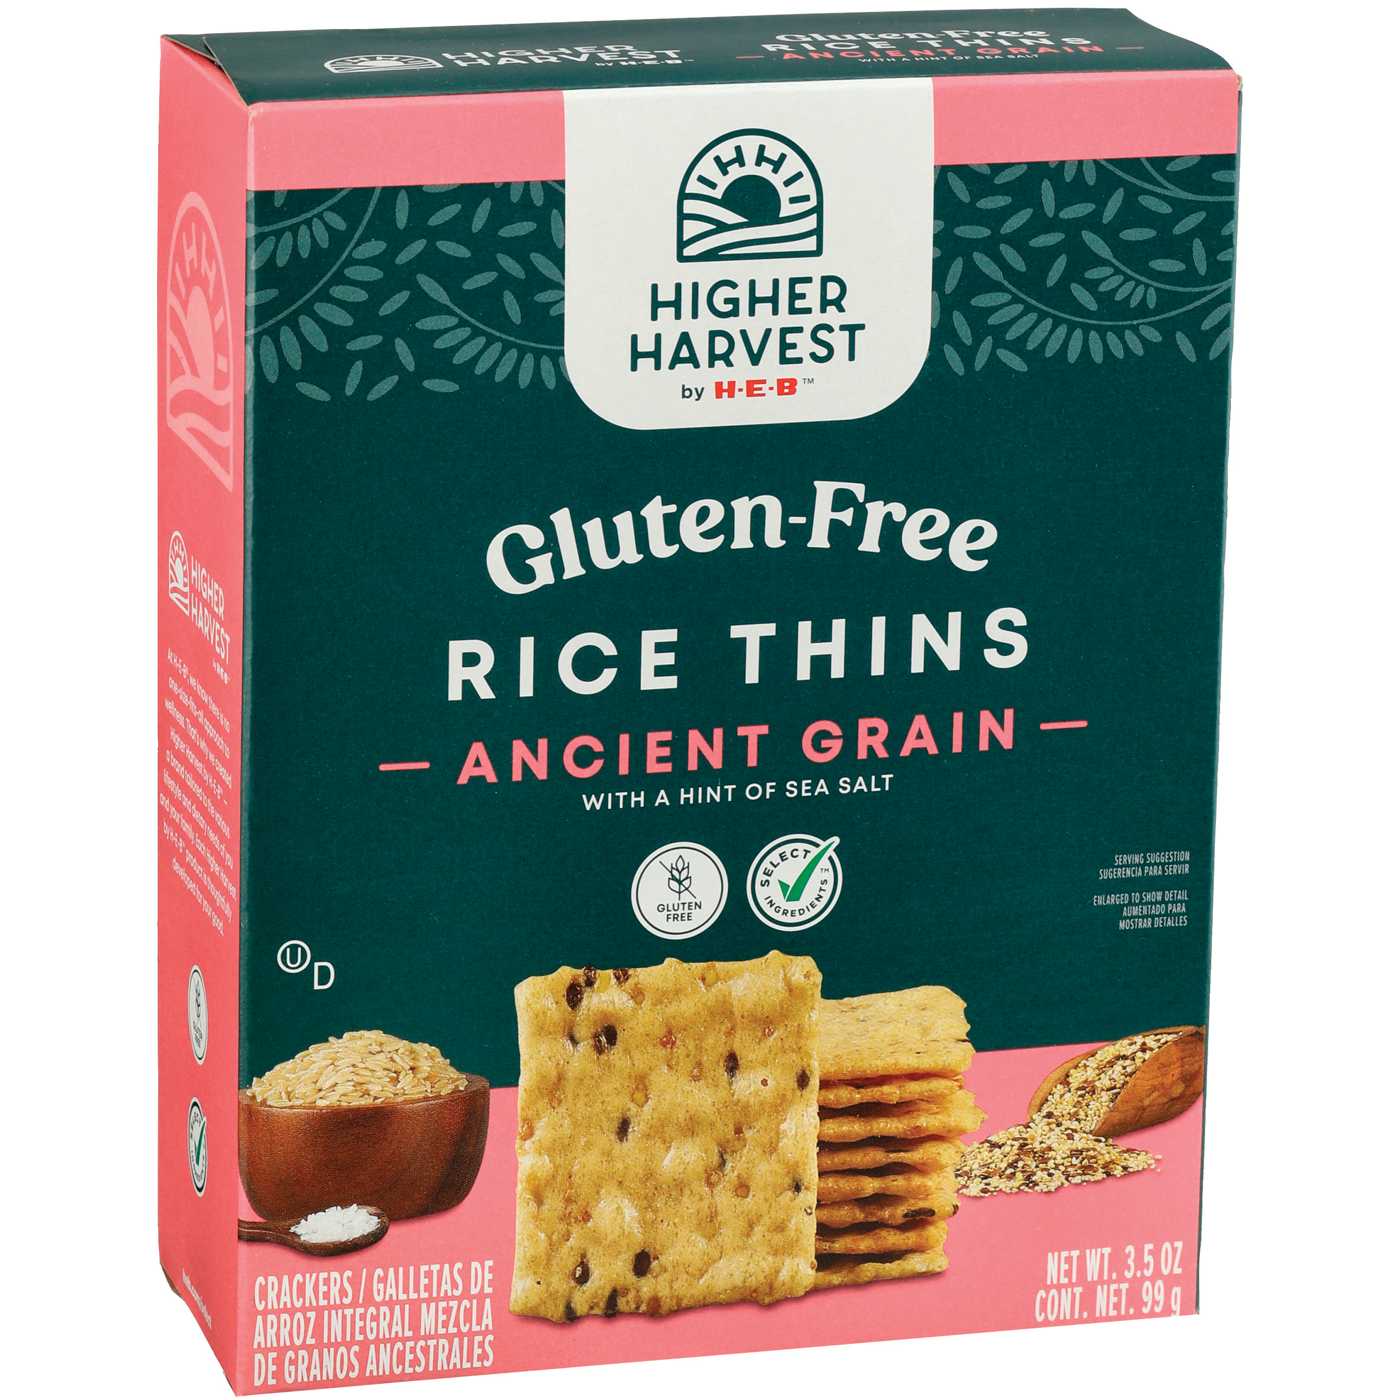 Higher Harvest by H-E-B Gluten-Free Rice Thins – Ancient Grain; image 2 of 2